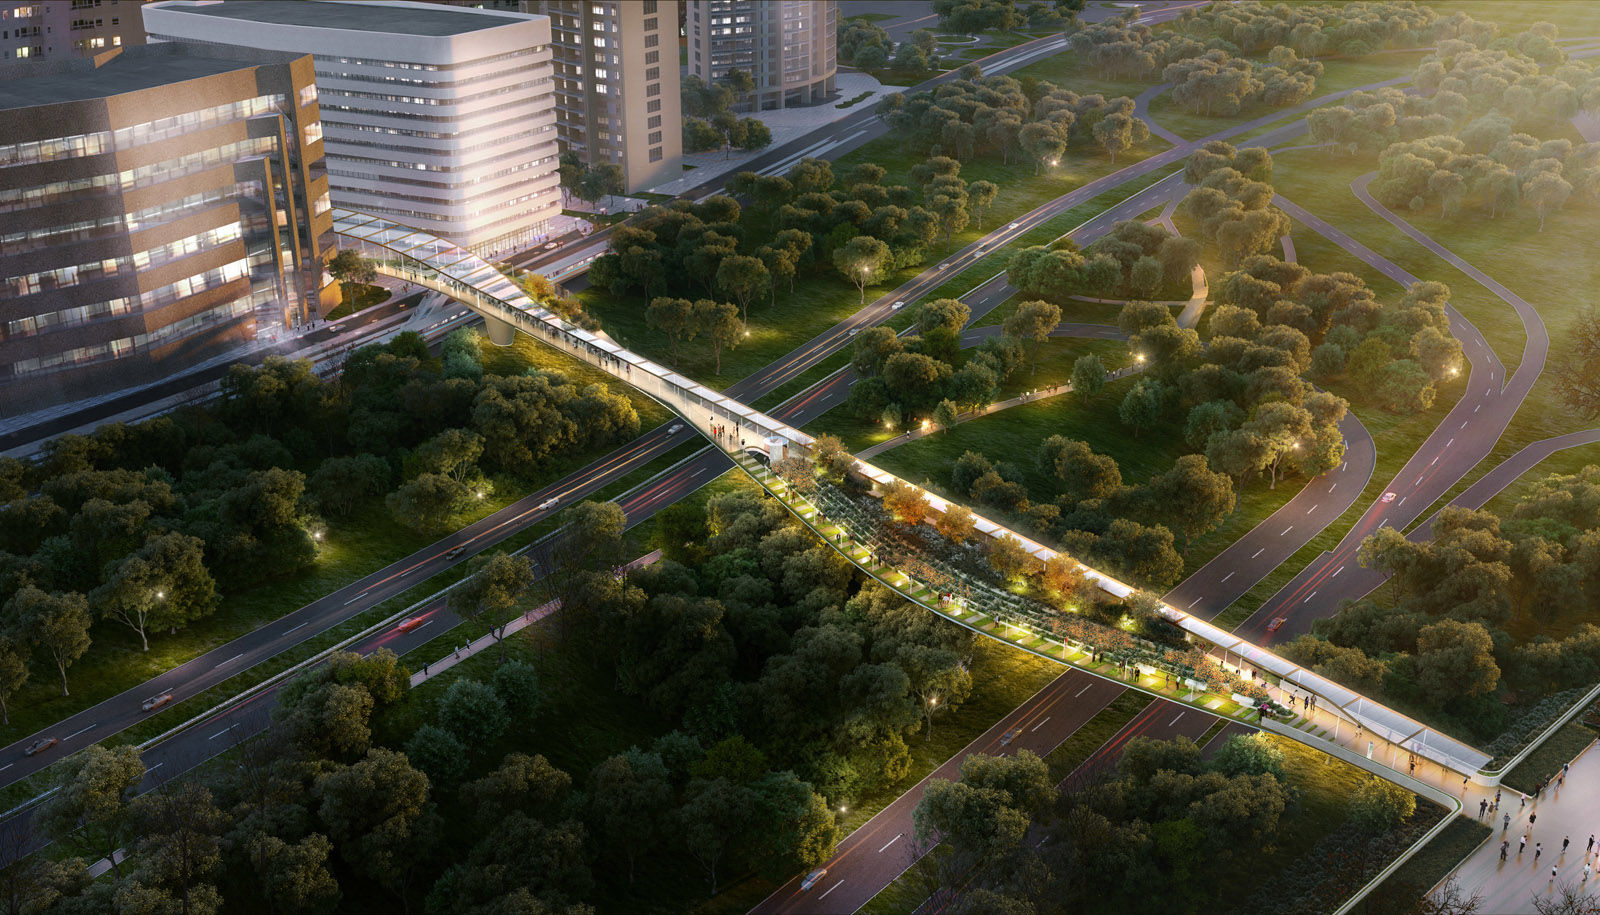 This artists rendering shows a pedestrian bridge above the George Washington Memorial Parkway. The bridge would connect Crystal City with Reagan National Airport. (Courtesy Crystal City Business Improvement District )